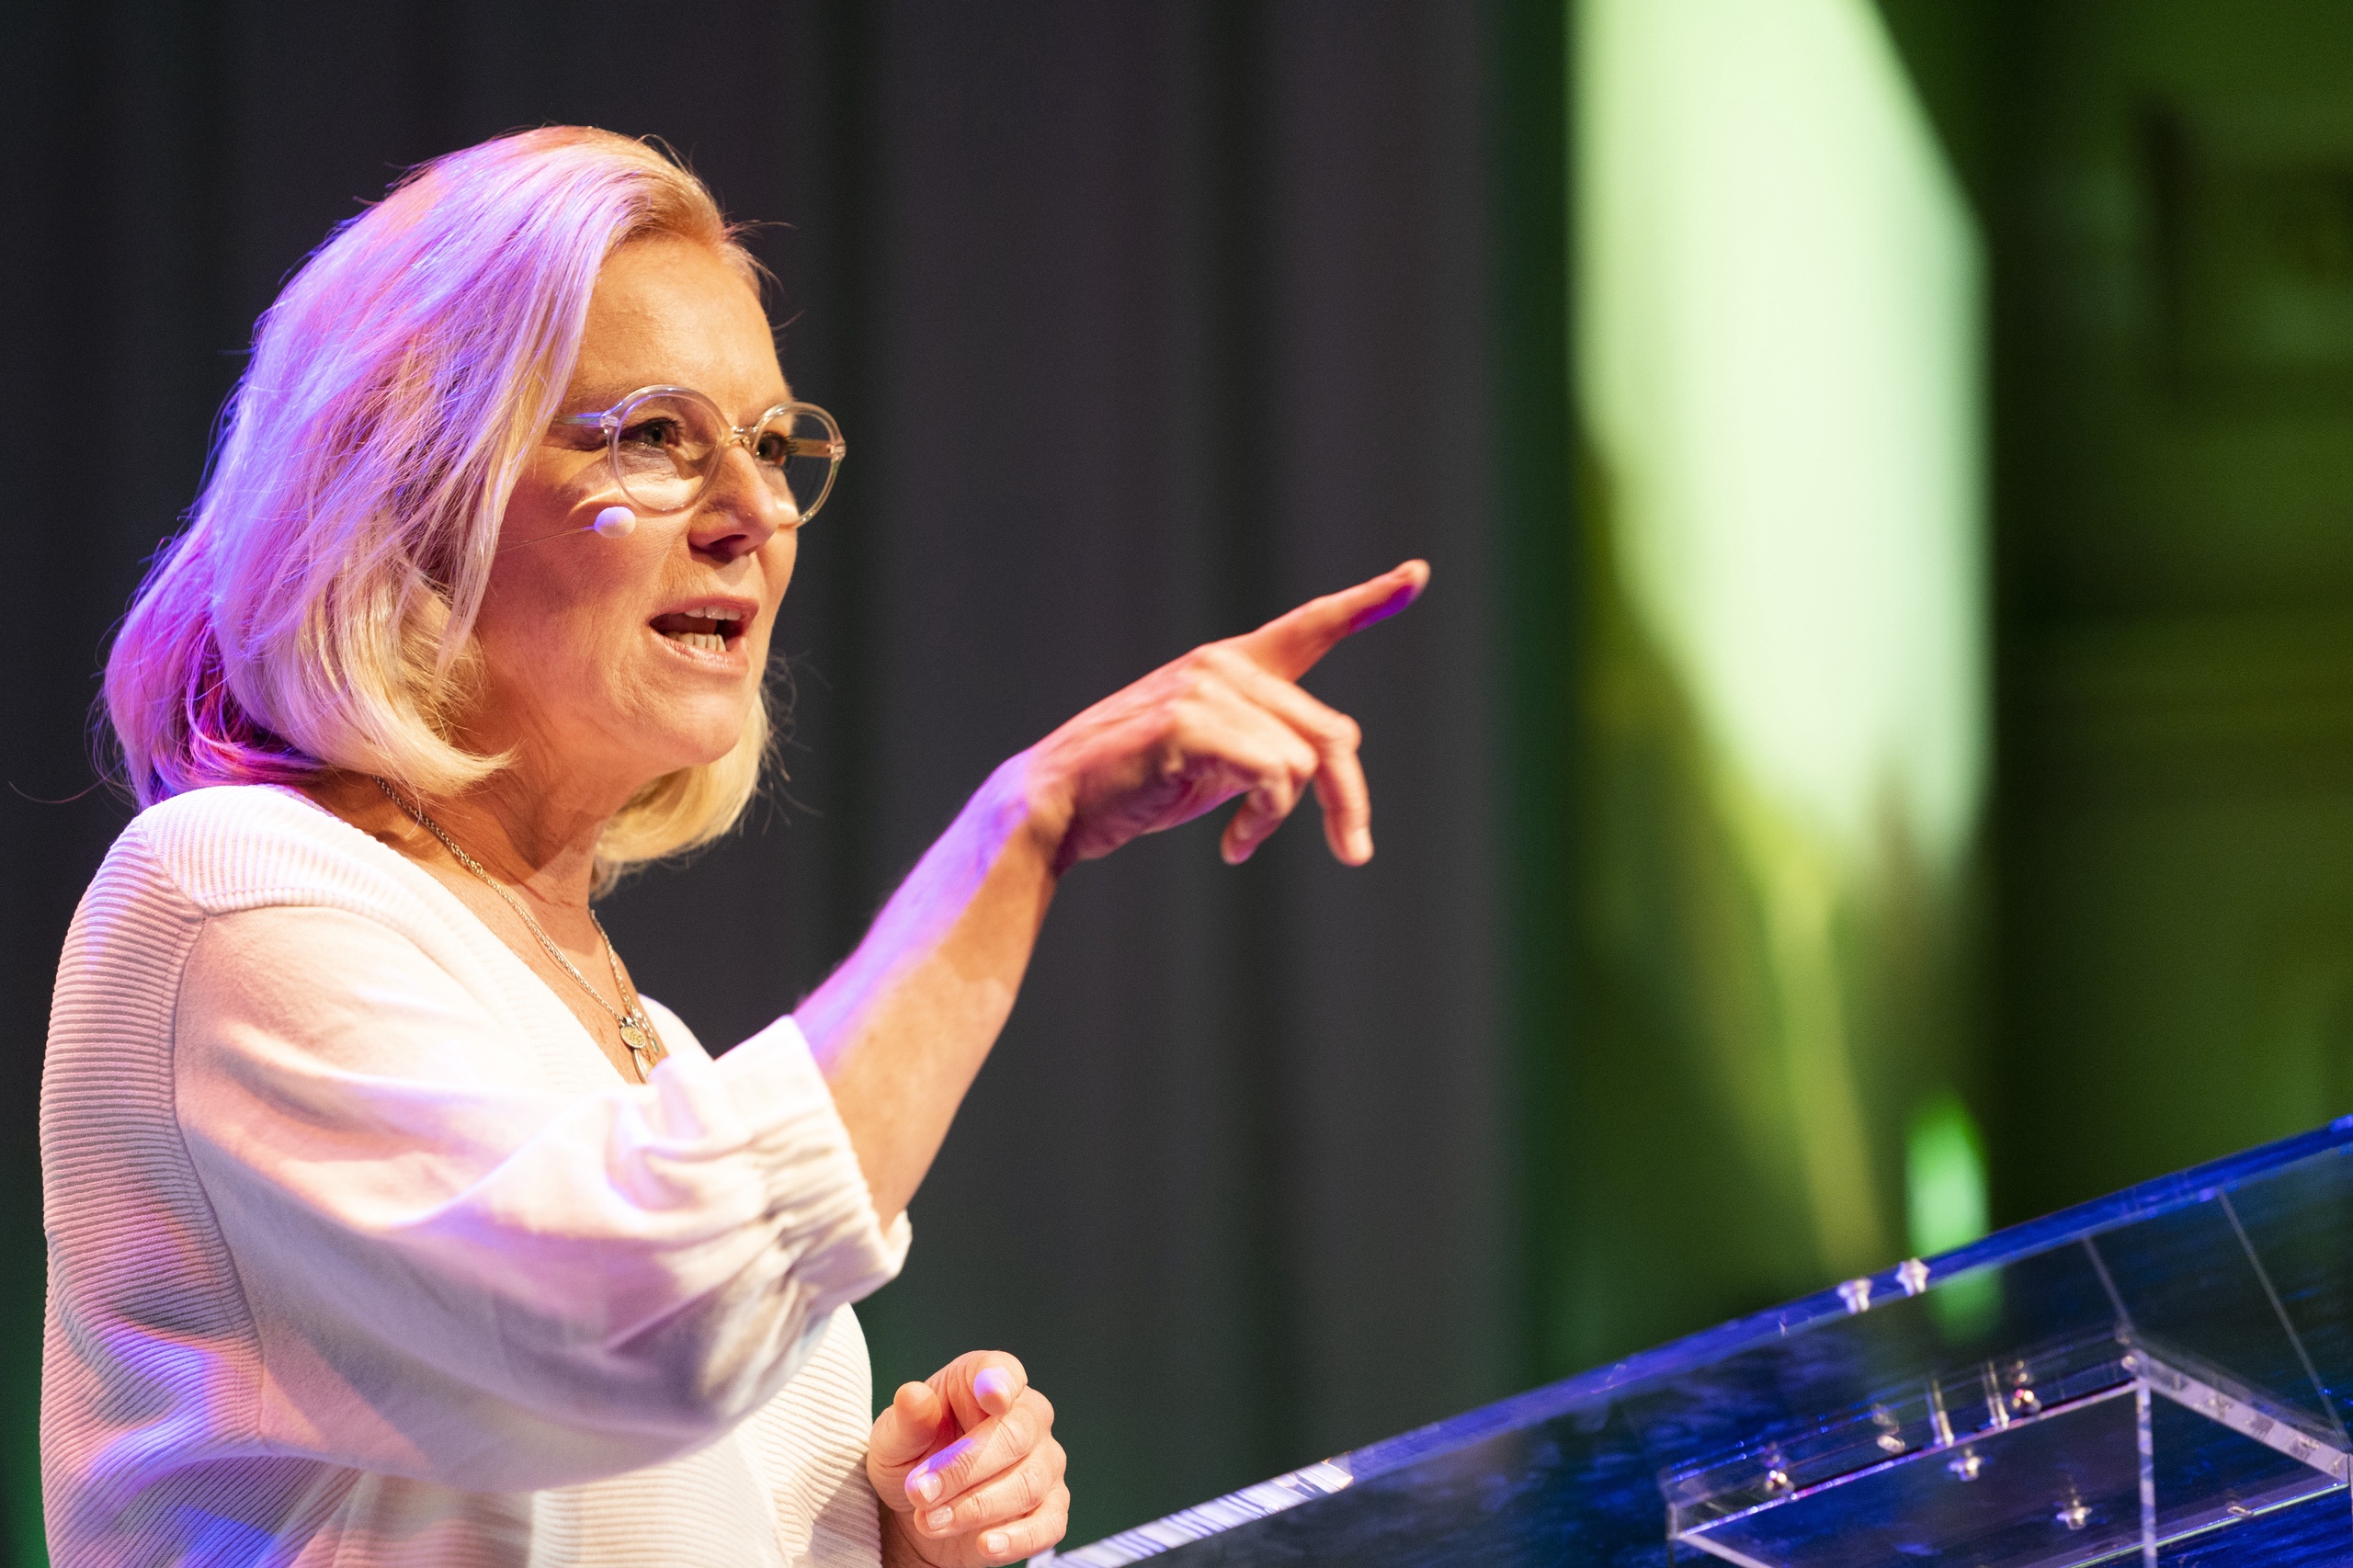 D66 party leader Sigrid Kaag warned in Arnhem at the kick-off of next month's campaign for elections for the Provincial Council against a strong conservative bloc in the Senate.  (Photo: ANP JEROEN JUMELET)